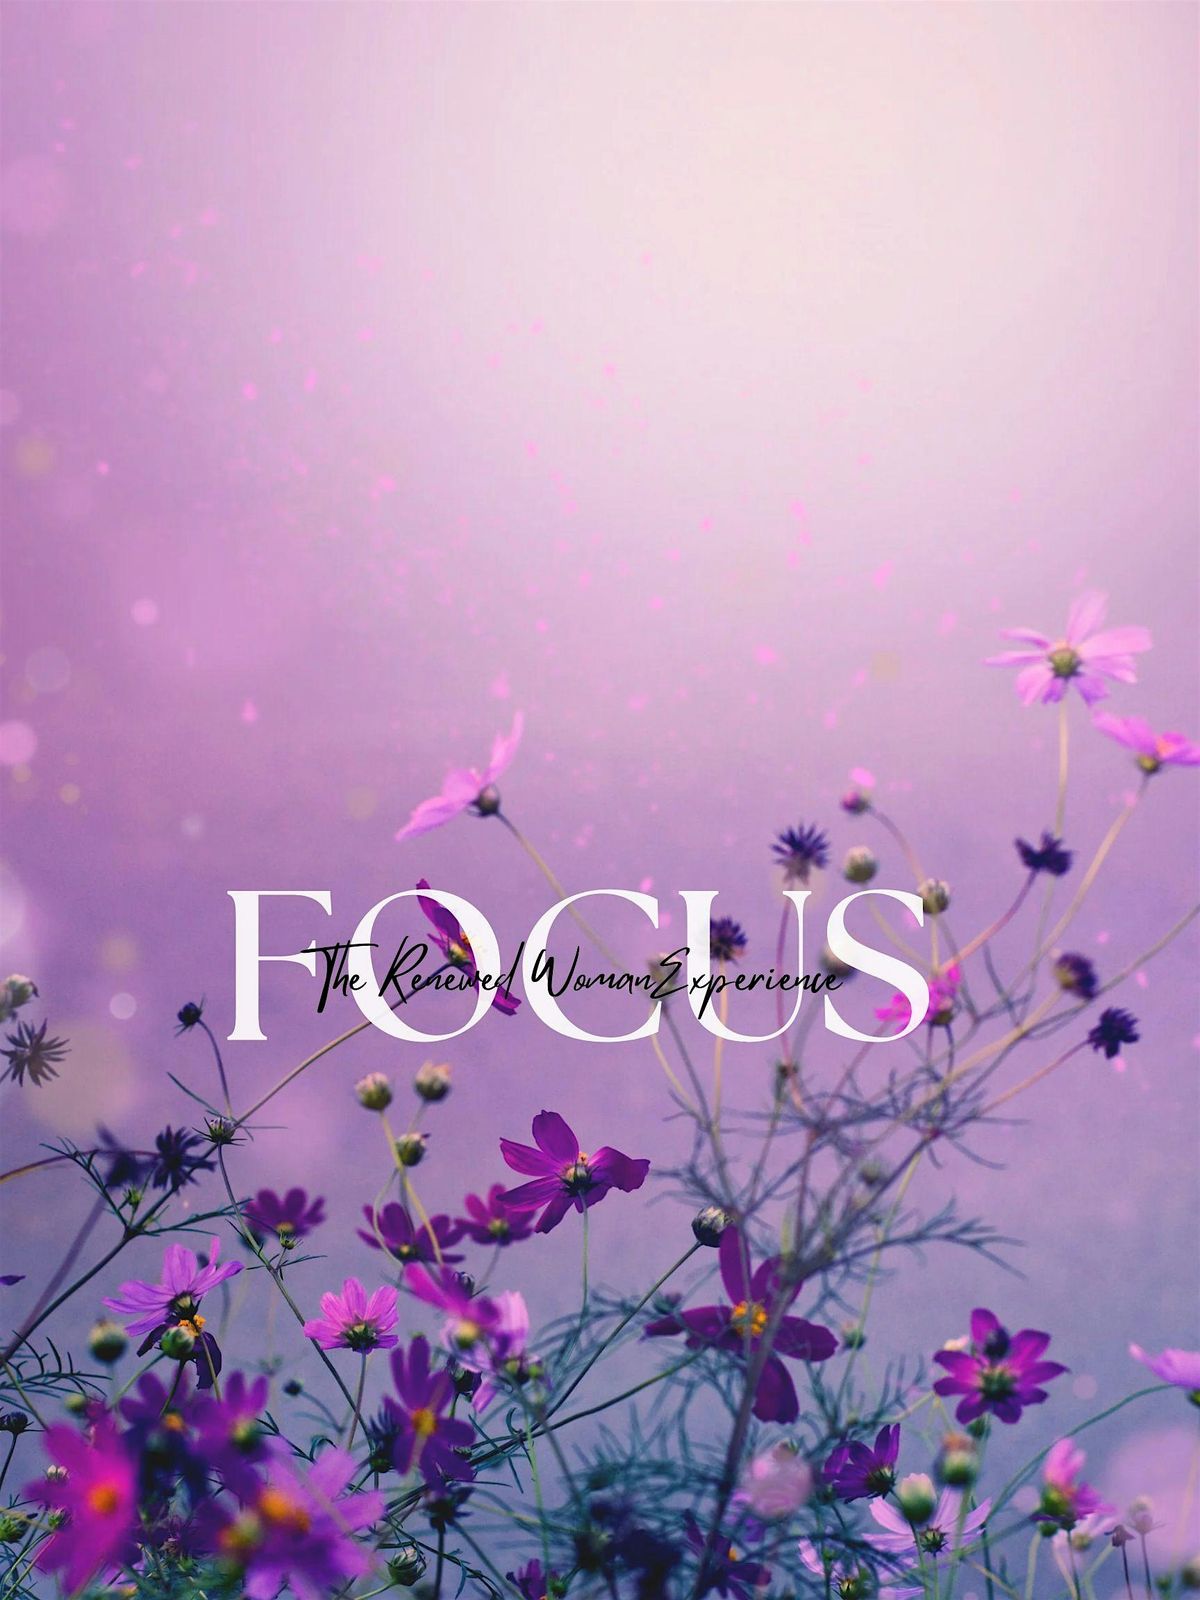 FOCUS - The Renewed Woman Experience